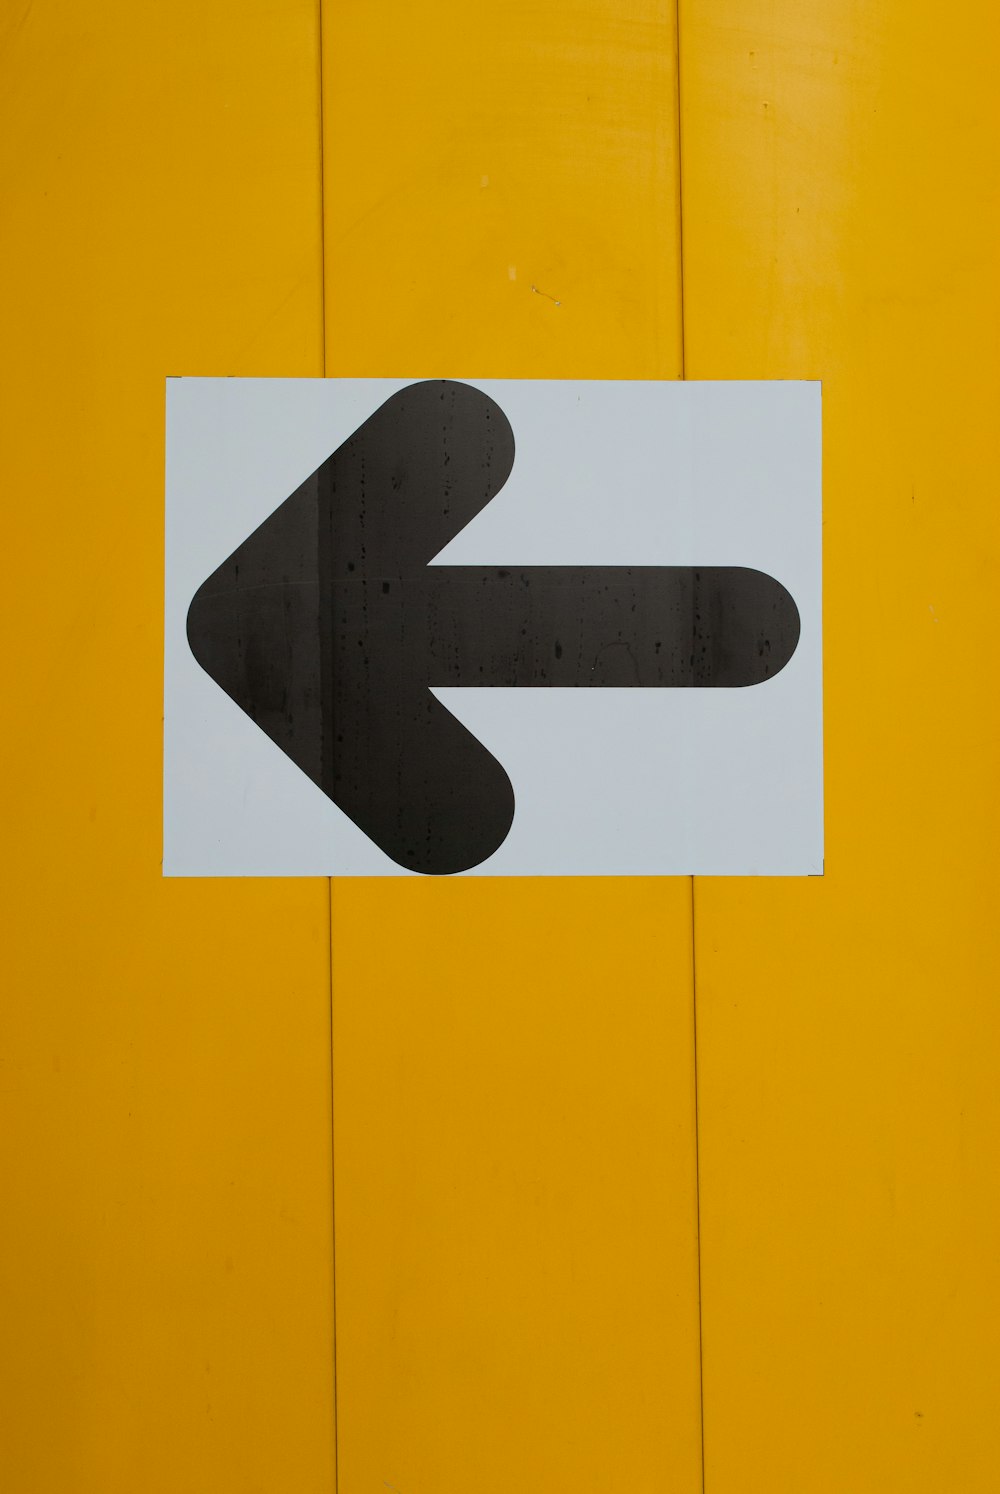 white and black arrow sign